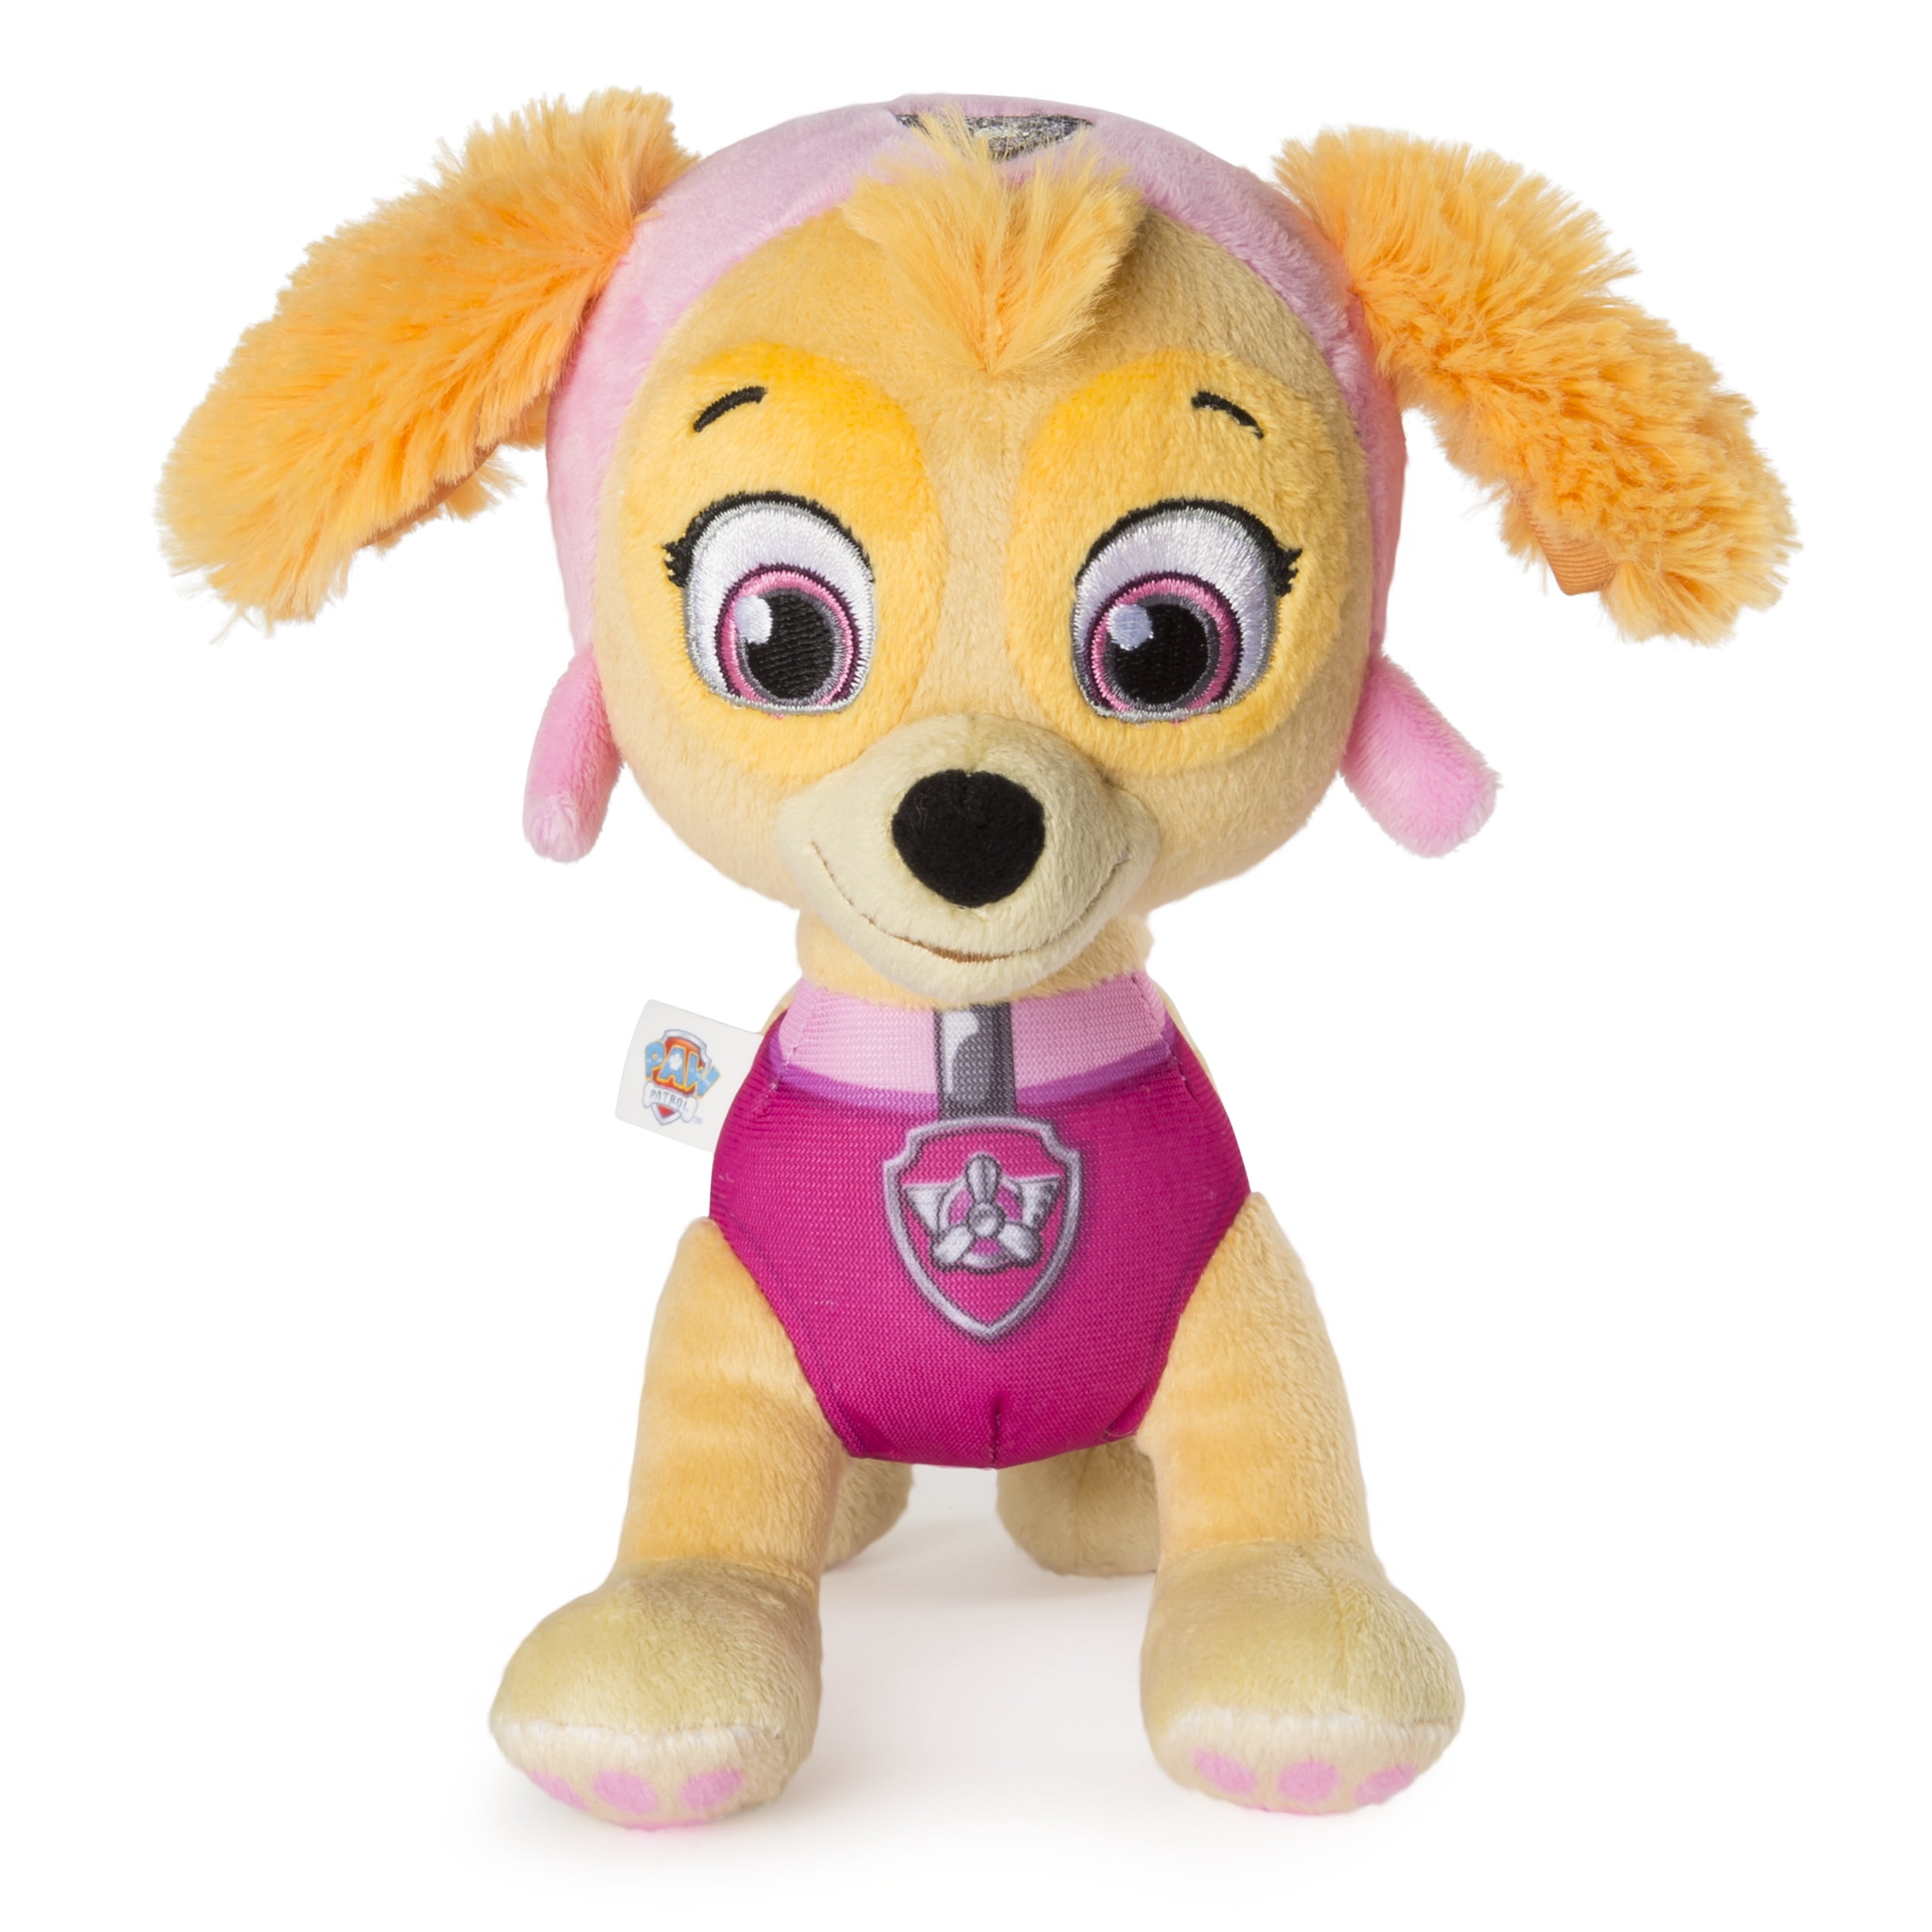 Paw Patrol 8” Skye Plush Toy for Ages Standing Plush with Stitched Detailing 